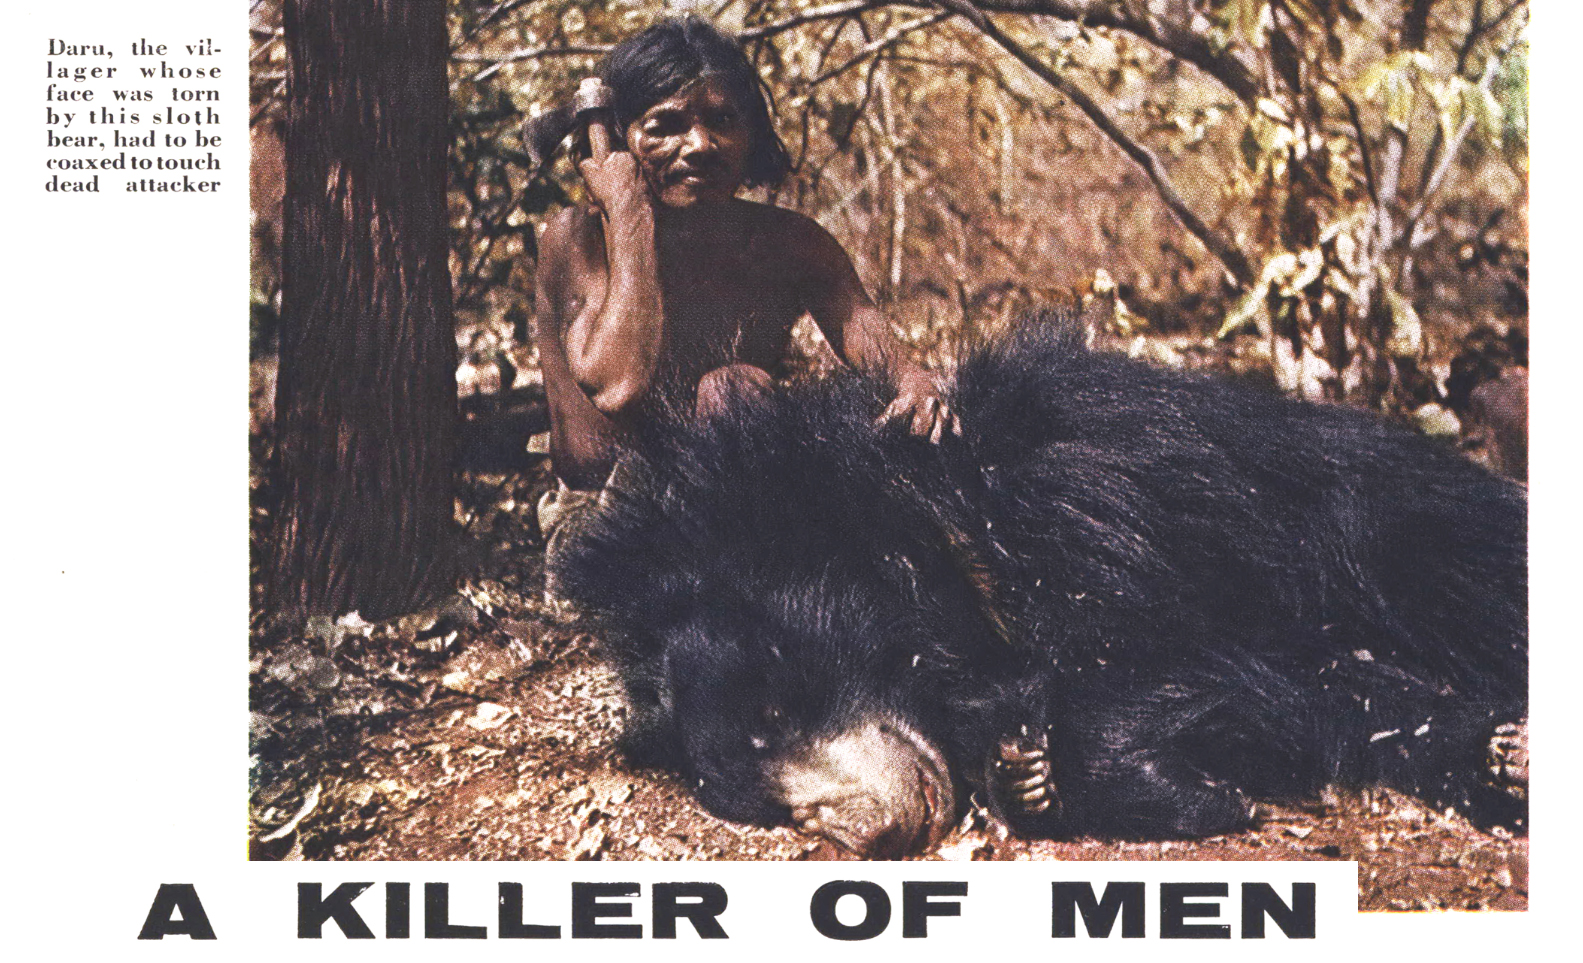 A Killer of Men: The Story of a Killer Sloth Bear, from the Archives